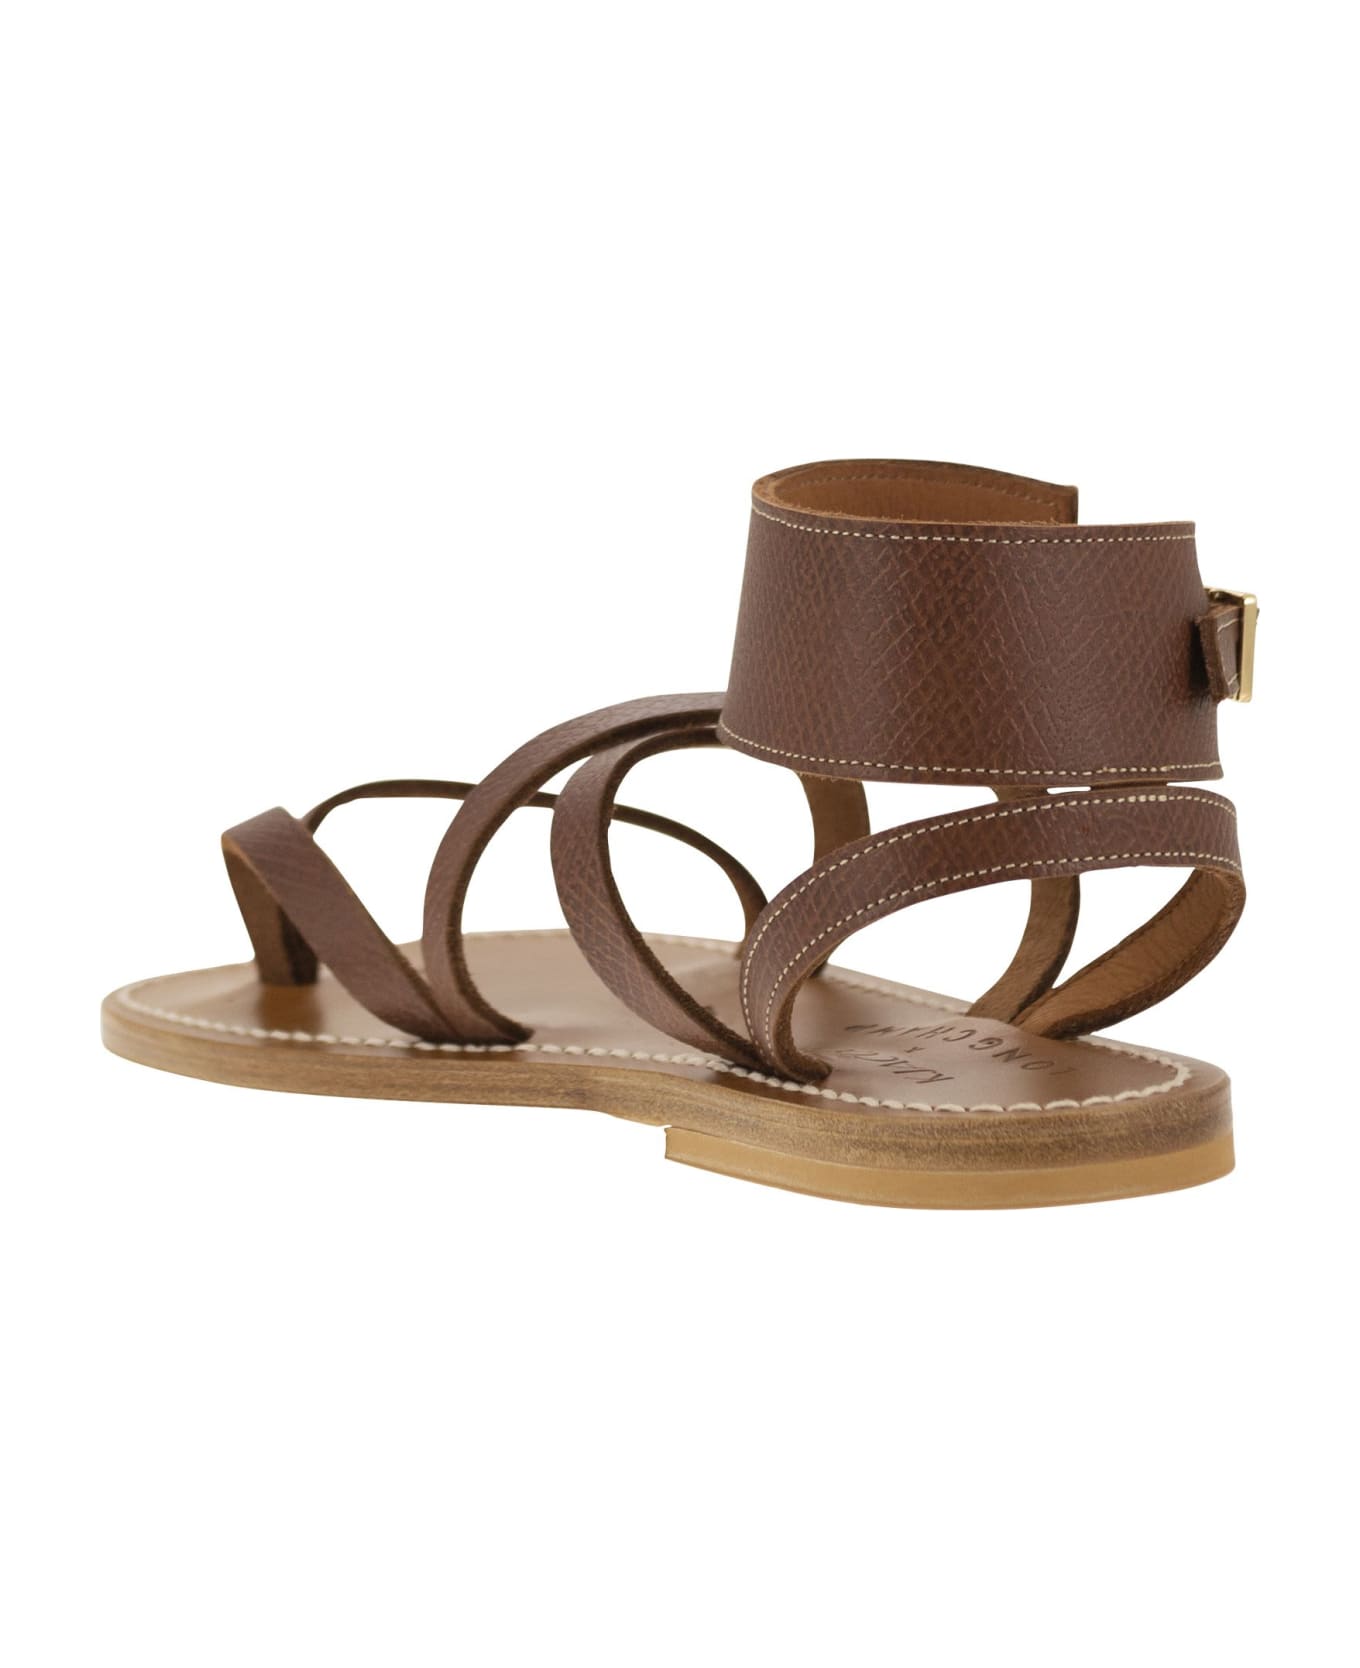 Longchamp X K.jacques Leather Sandals - Brown サンダル